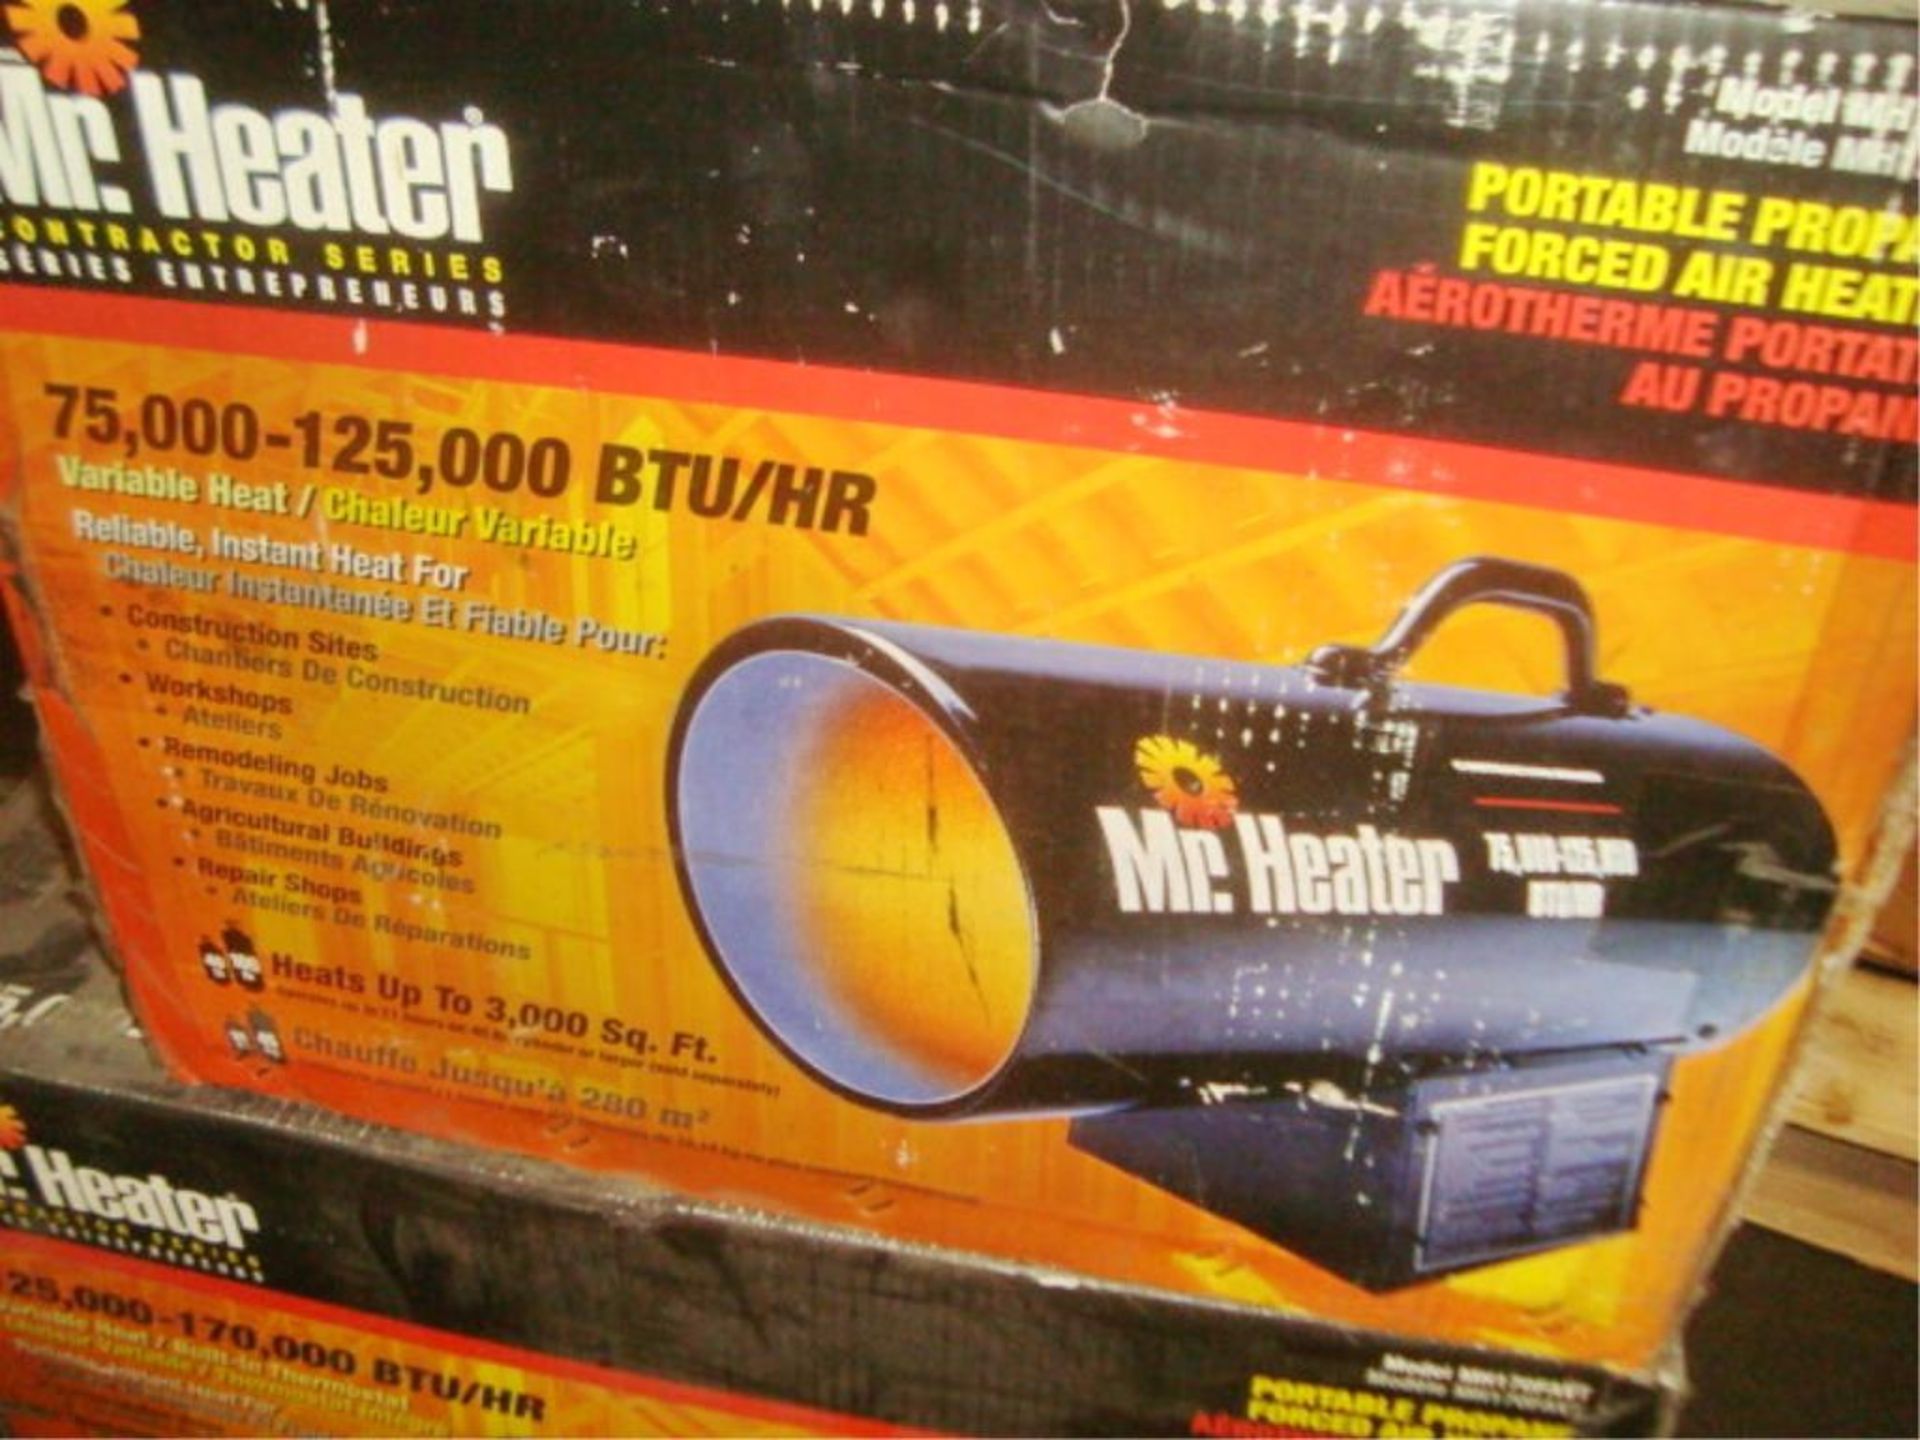 Portable Propane Heaters - Image 5 of 7